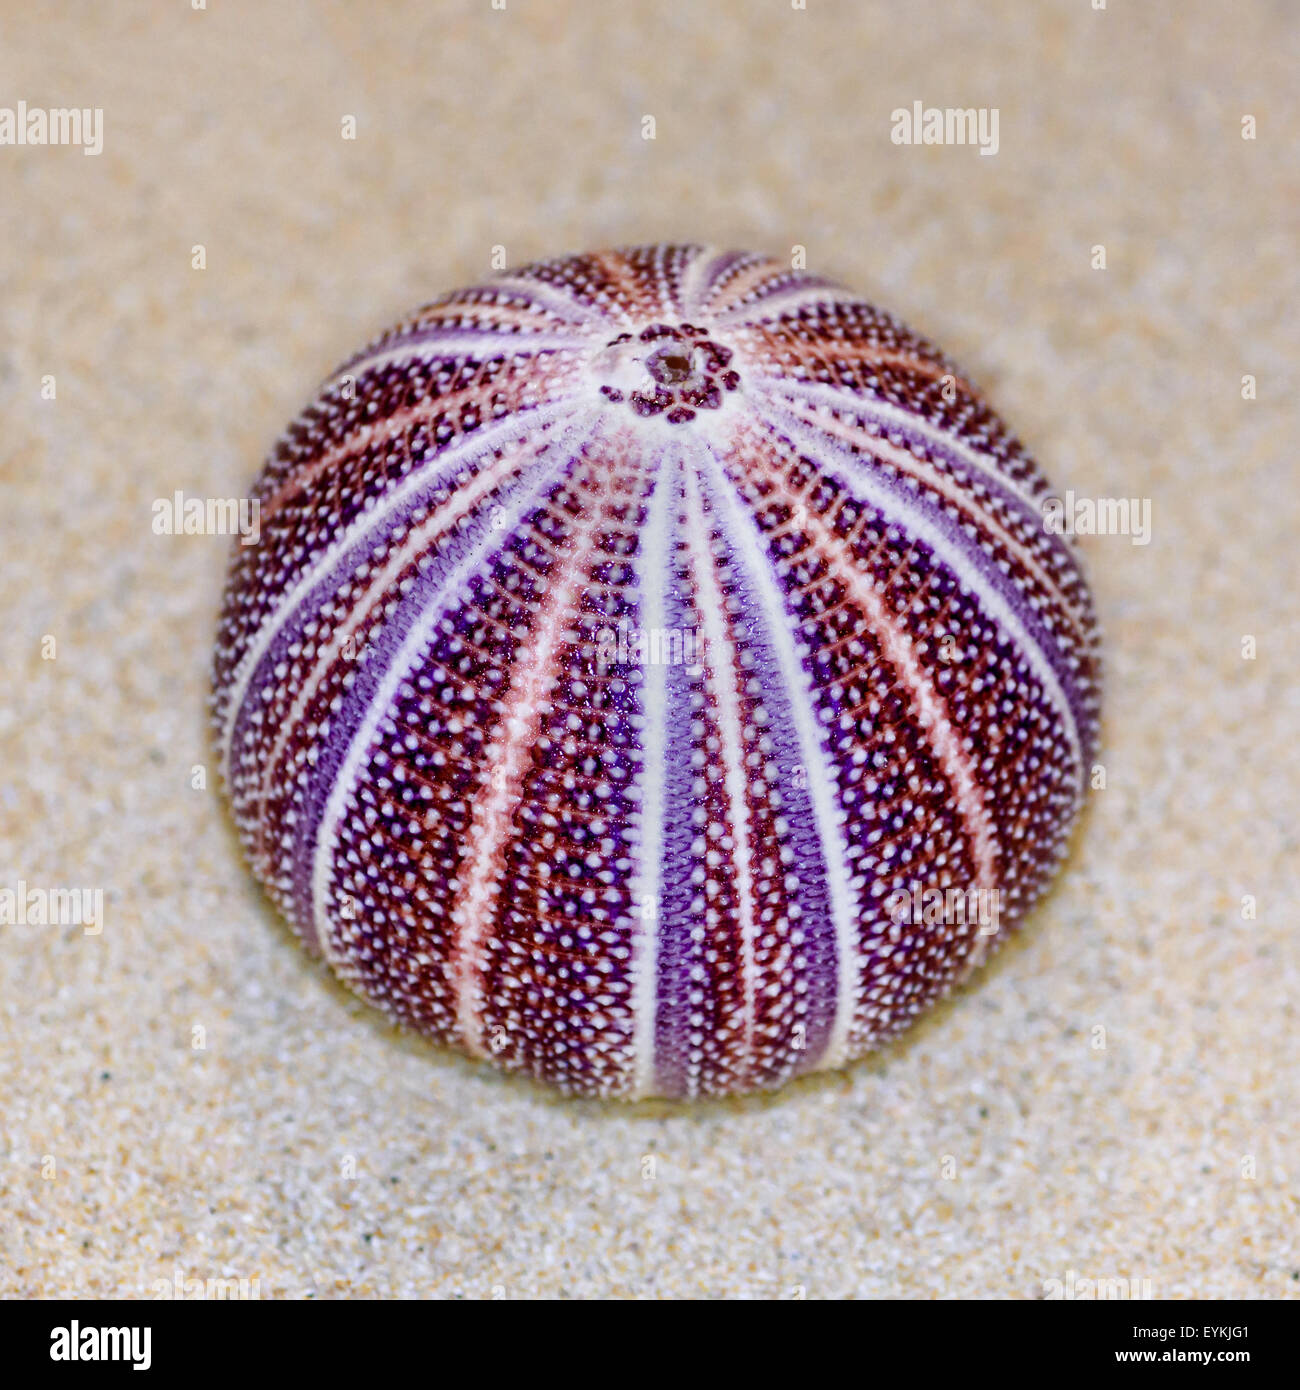 Colorful shell of Sea Urchin or Urchin is round and spiny with purple and red on sand Stock Photo